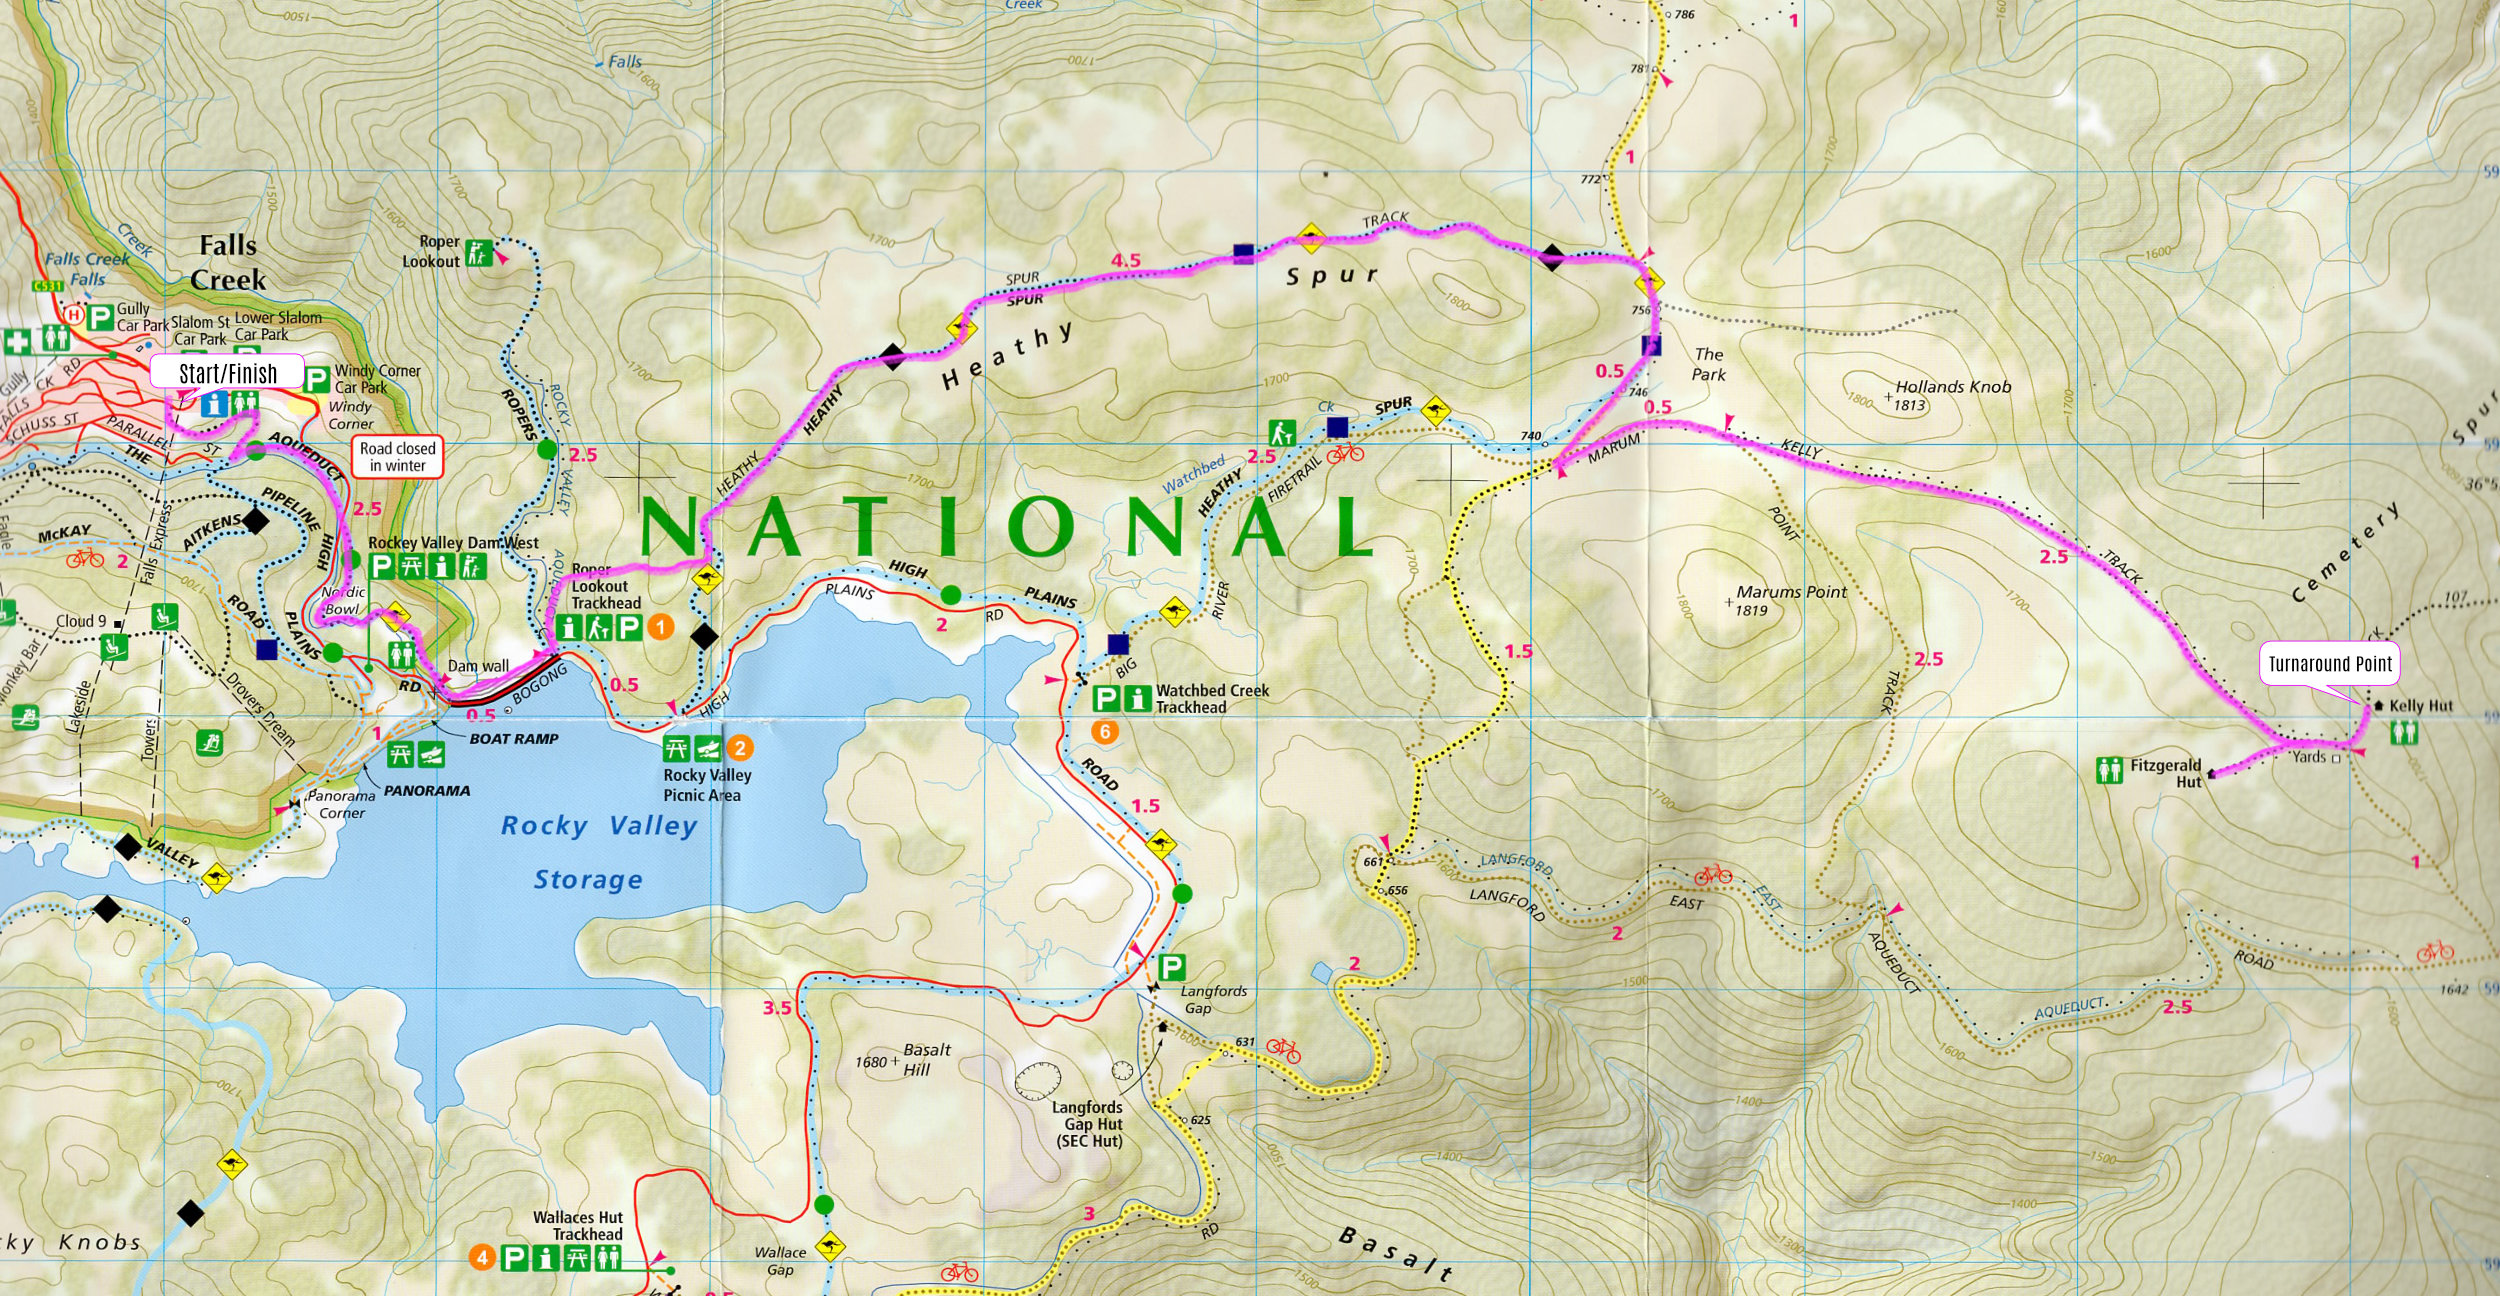 AC 25km course map